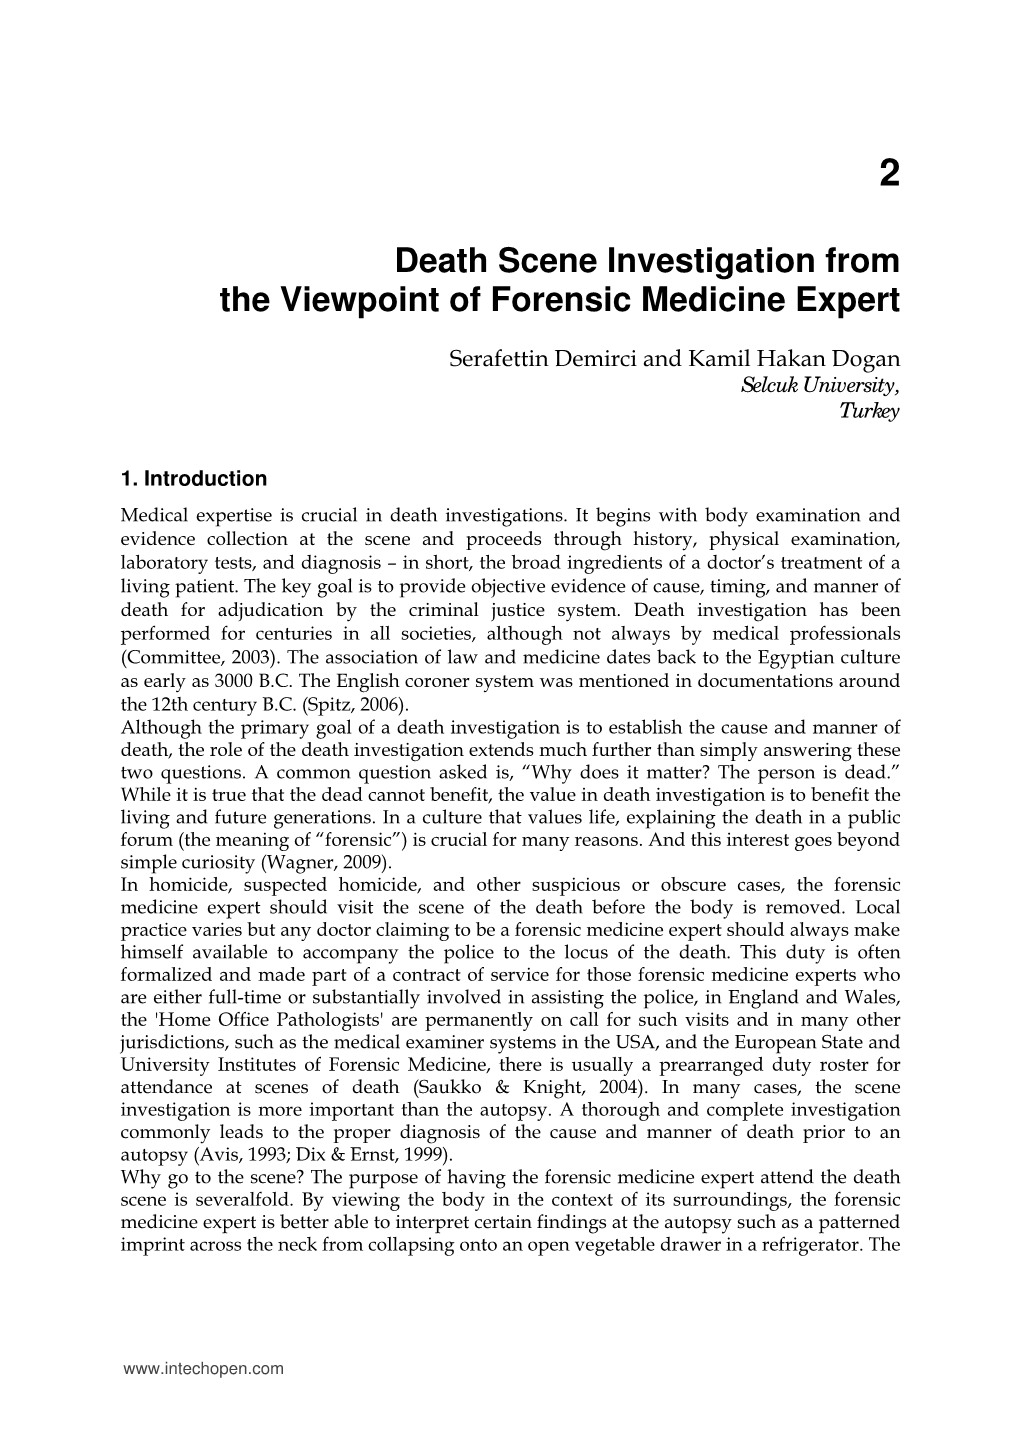 Death Scene Investigation from the Viewpoint of Forensic Medicine Expert